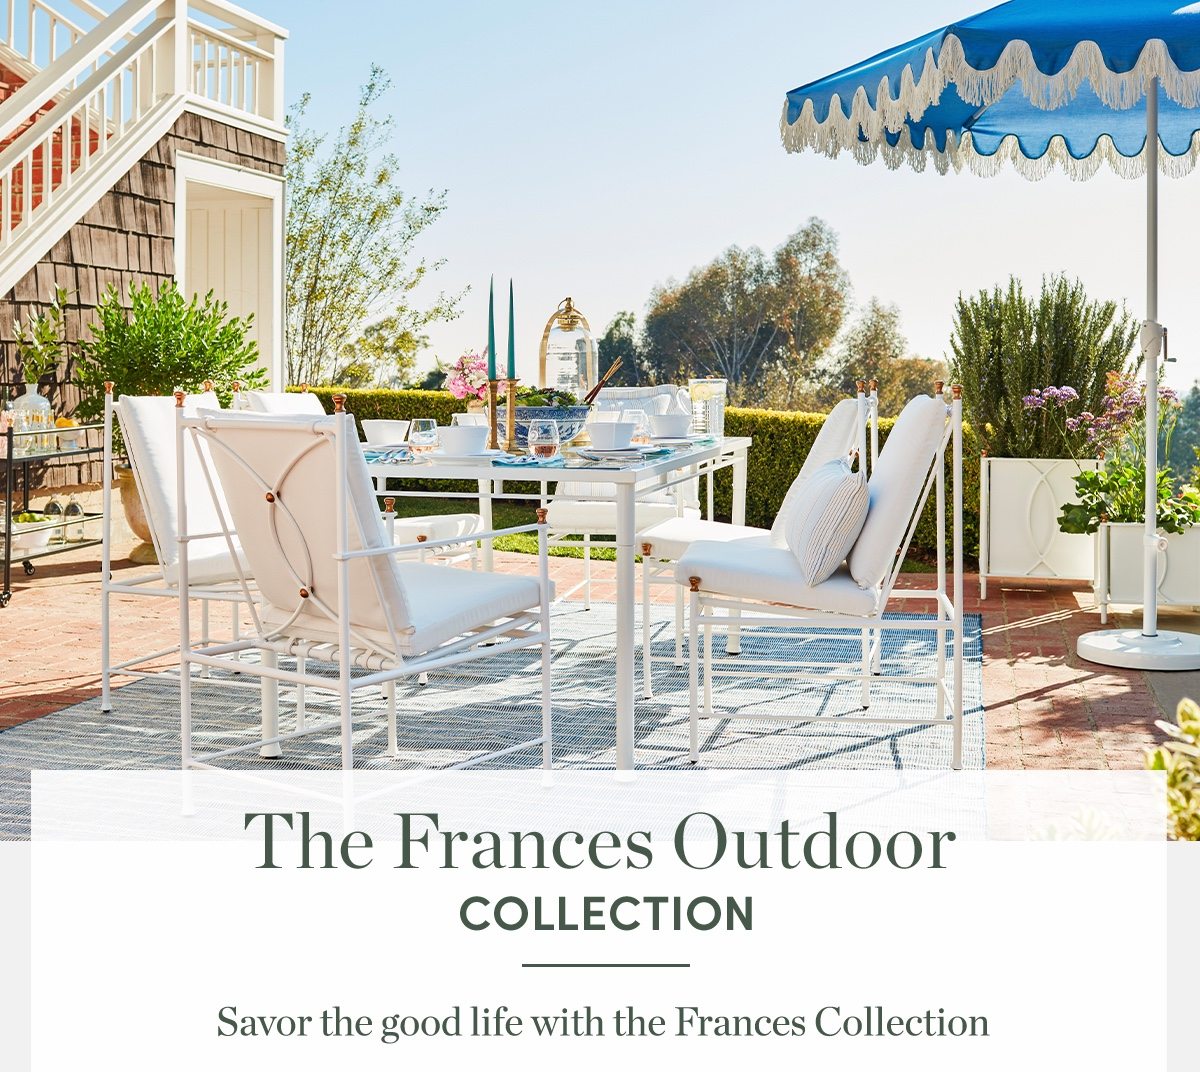 The Frances Outdoor Collection